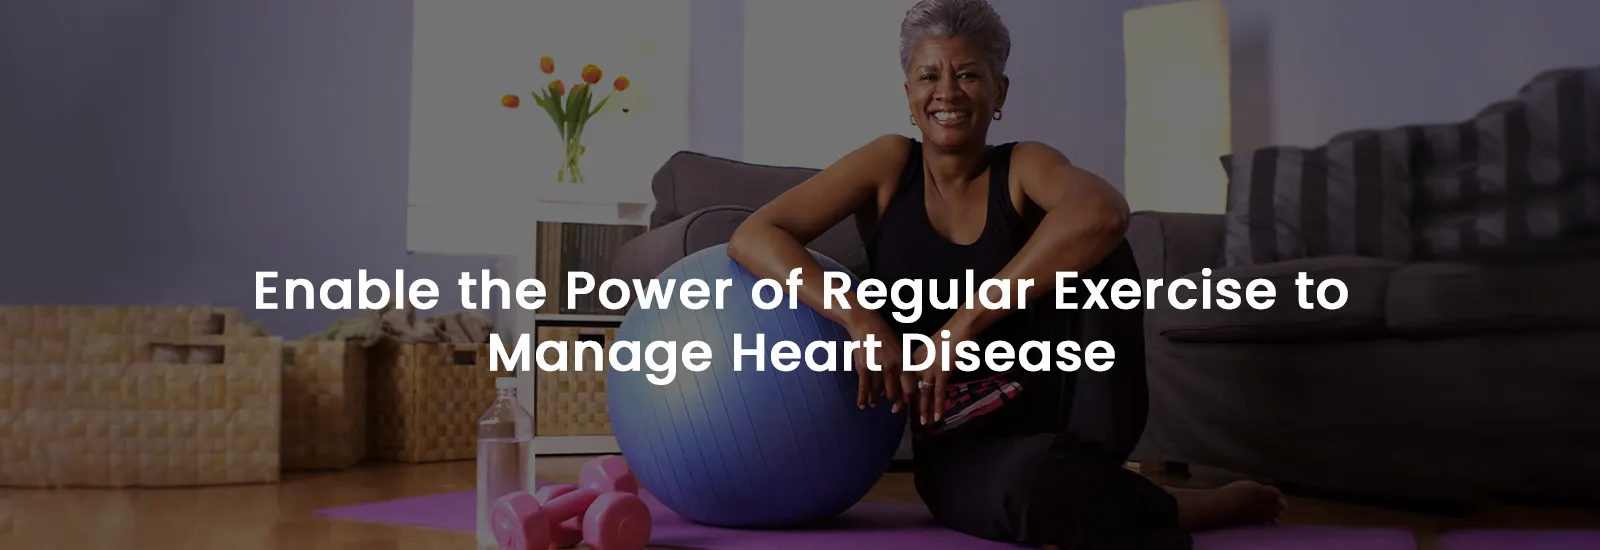 Enable the Power of Regular Exercise to Manage Heart Disease | Banner Image